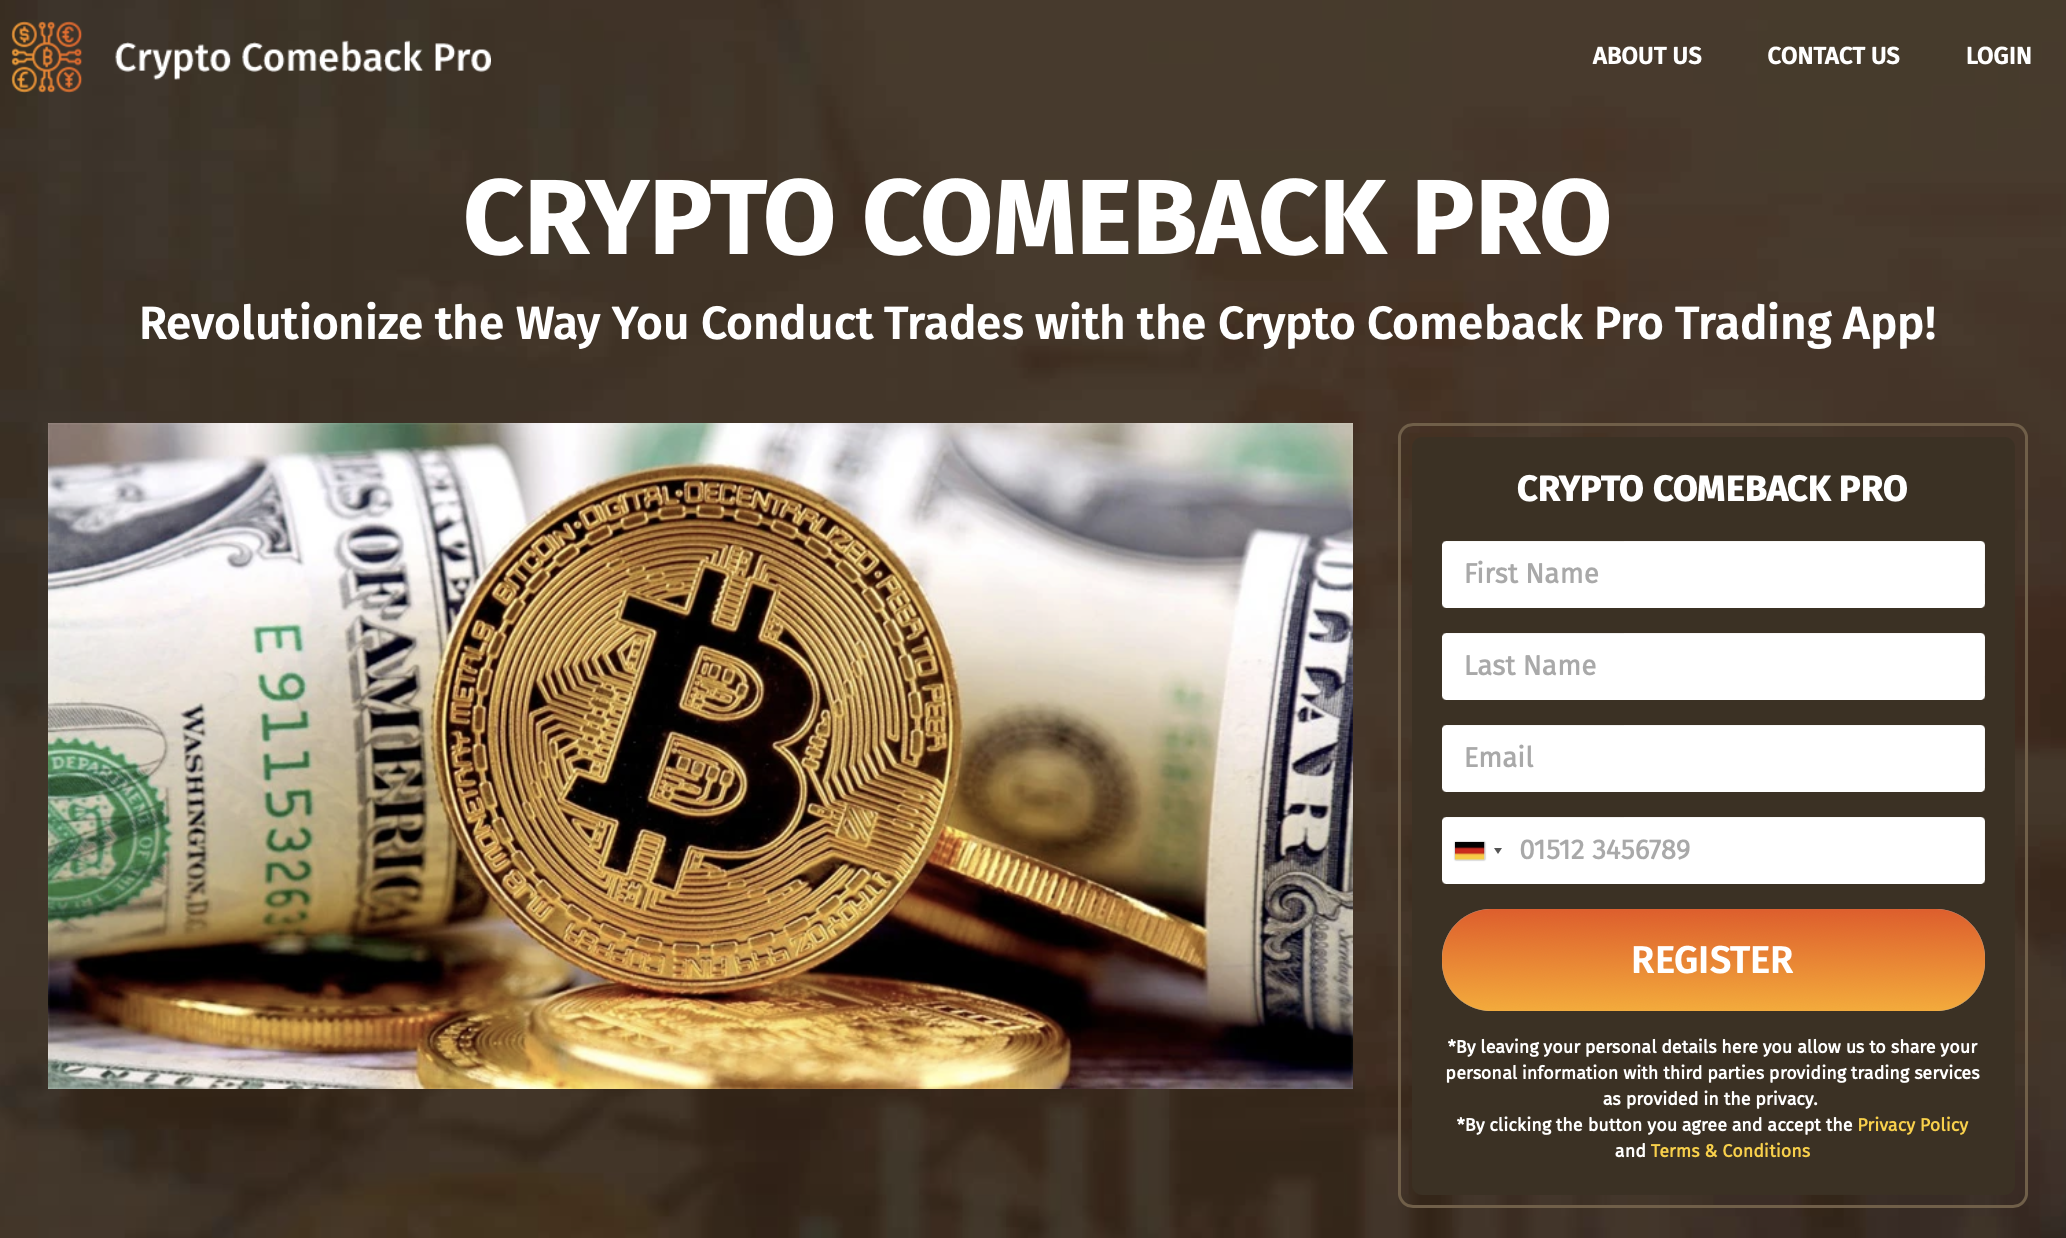 The official website of crypto comeback pro